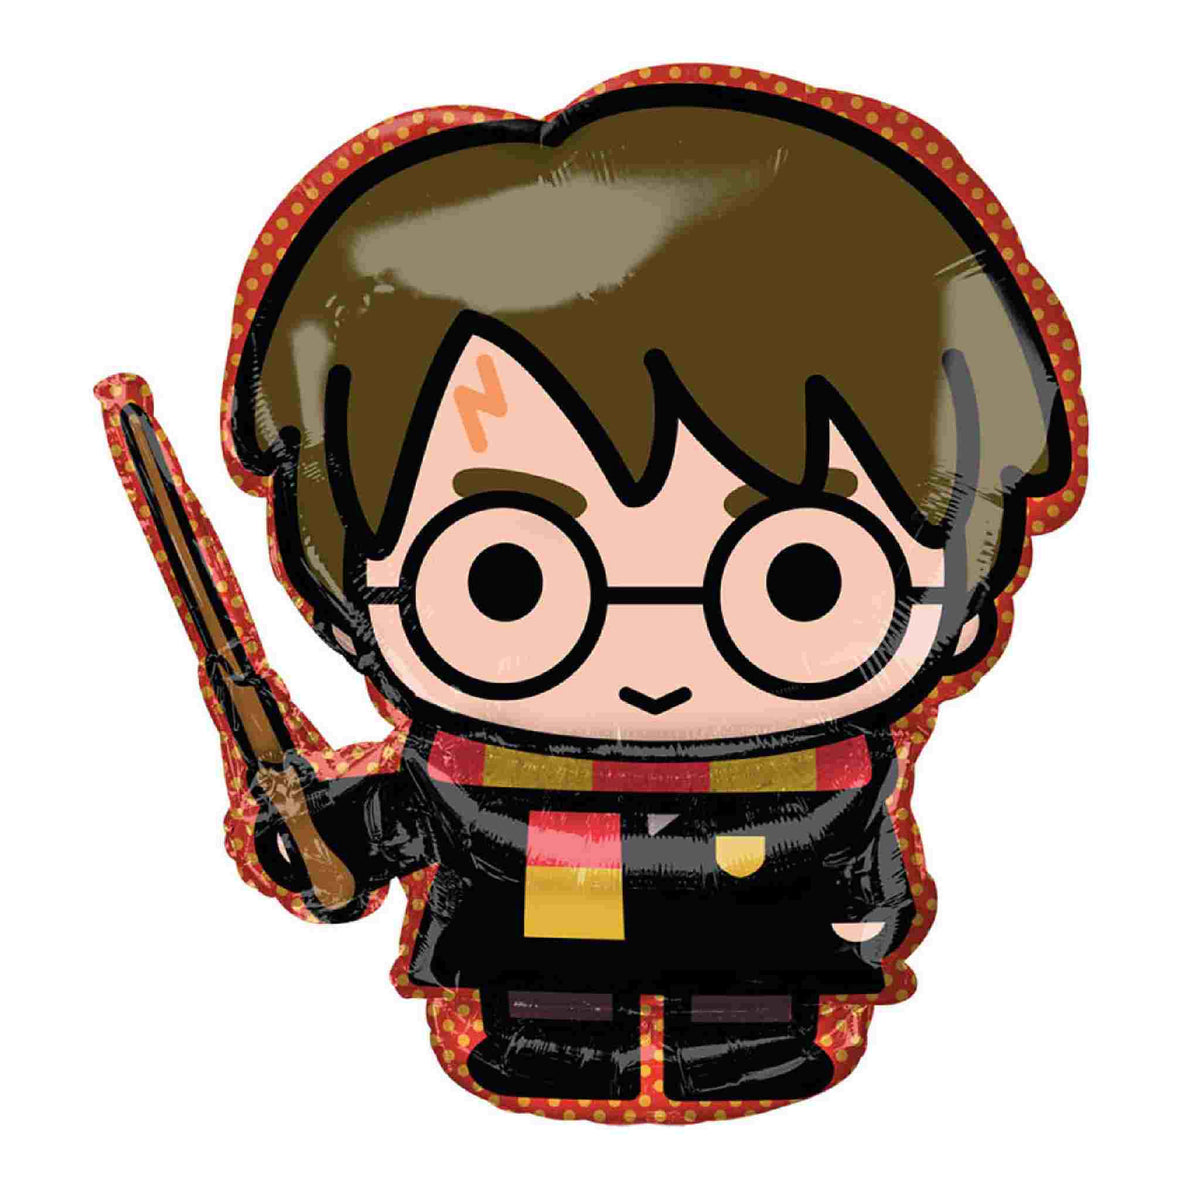 Harry Potter Party Decorations - Alba in bookland